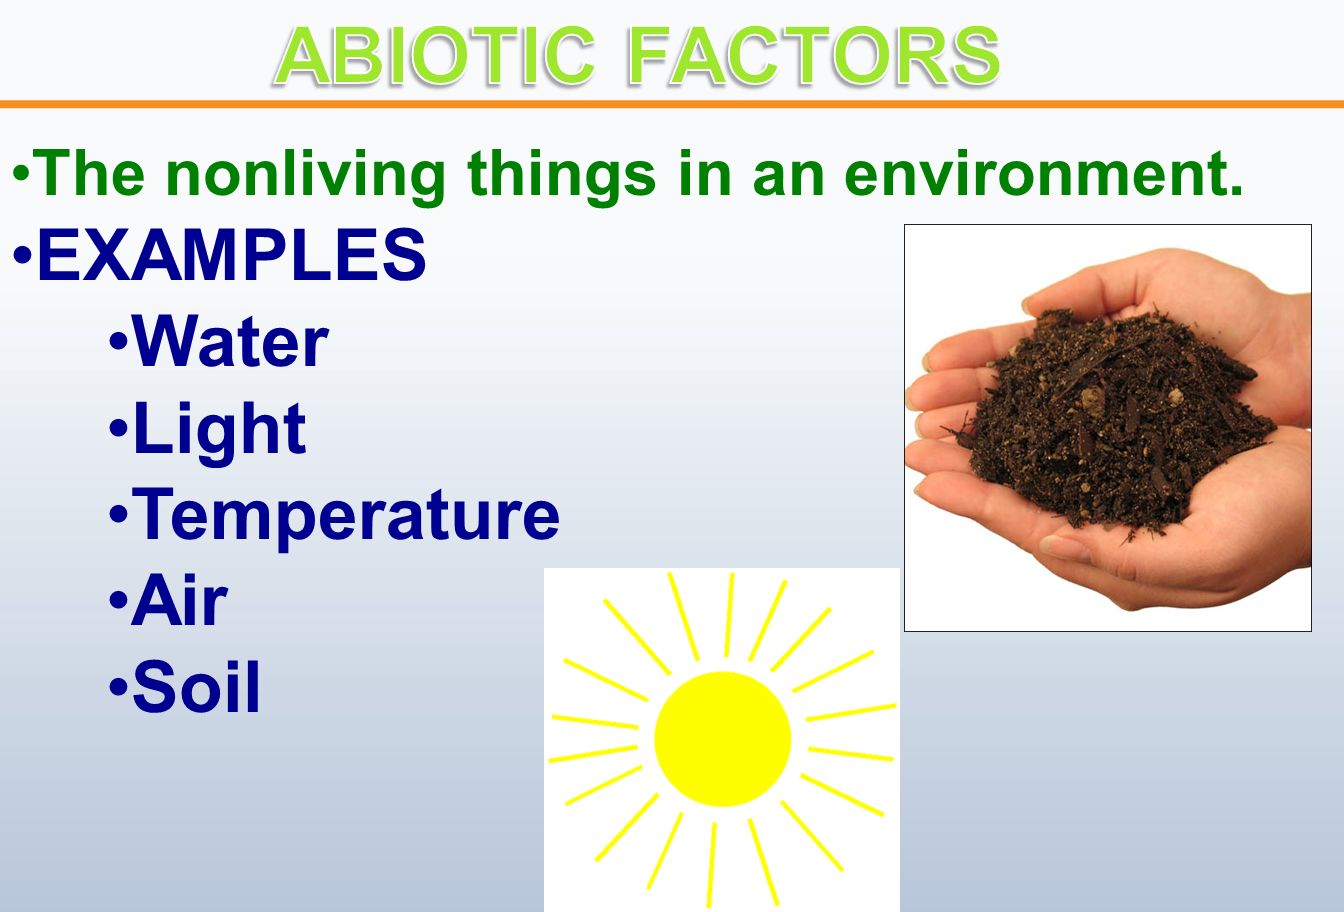 The nonliving things in an environment. EXAMPLES Water Light Temperature Air Soil